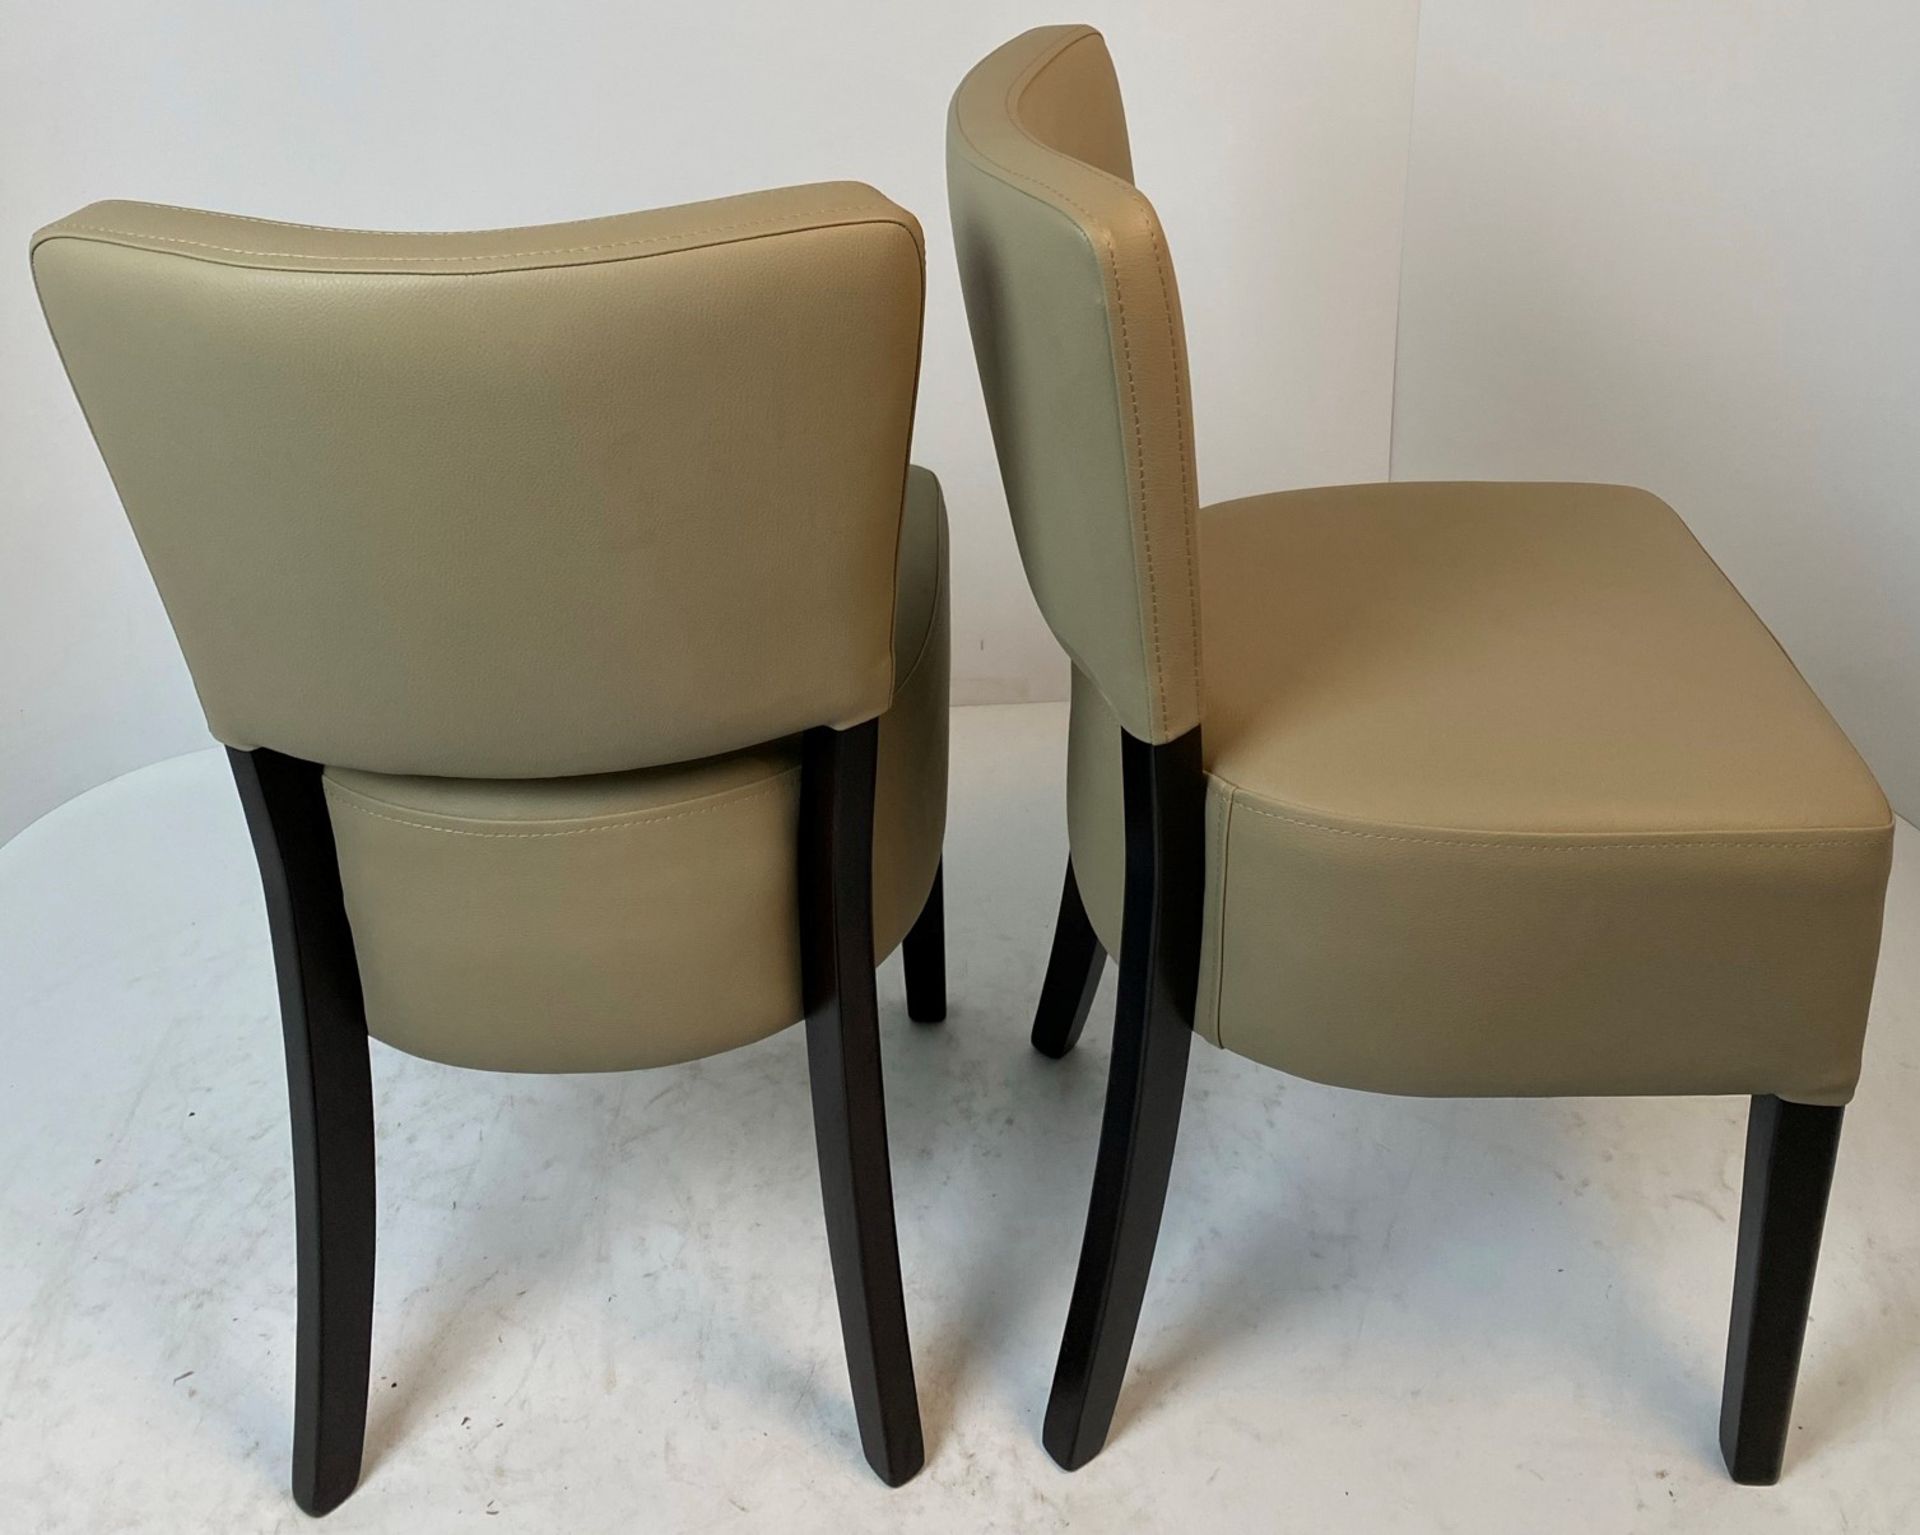 2 x Memphis Vena BE-9 side/dining chairs with Wenge coloured frames - Image 2 of 3